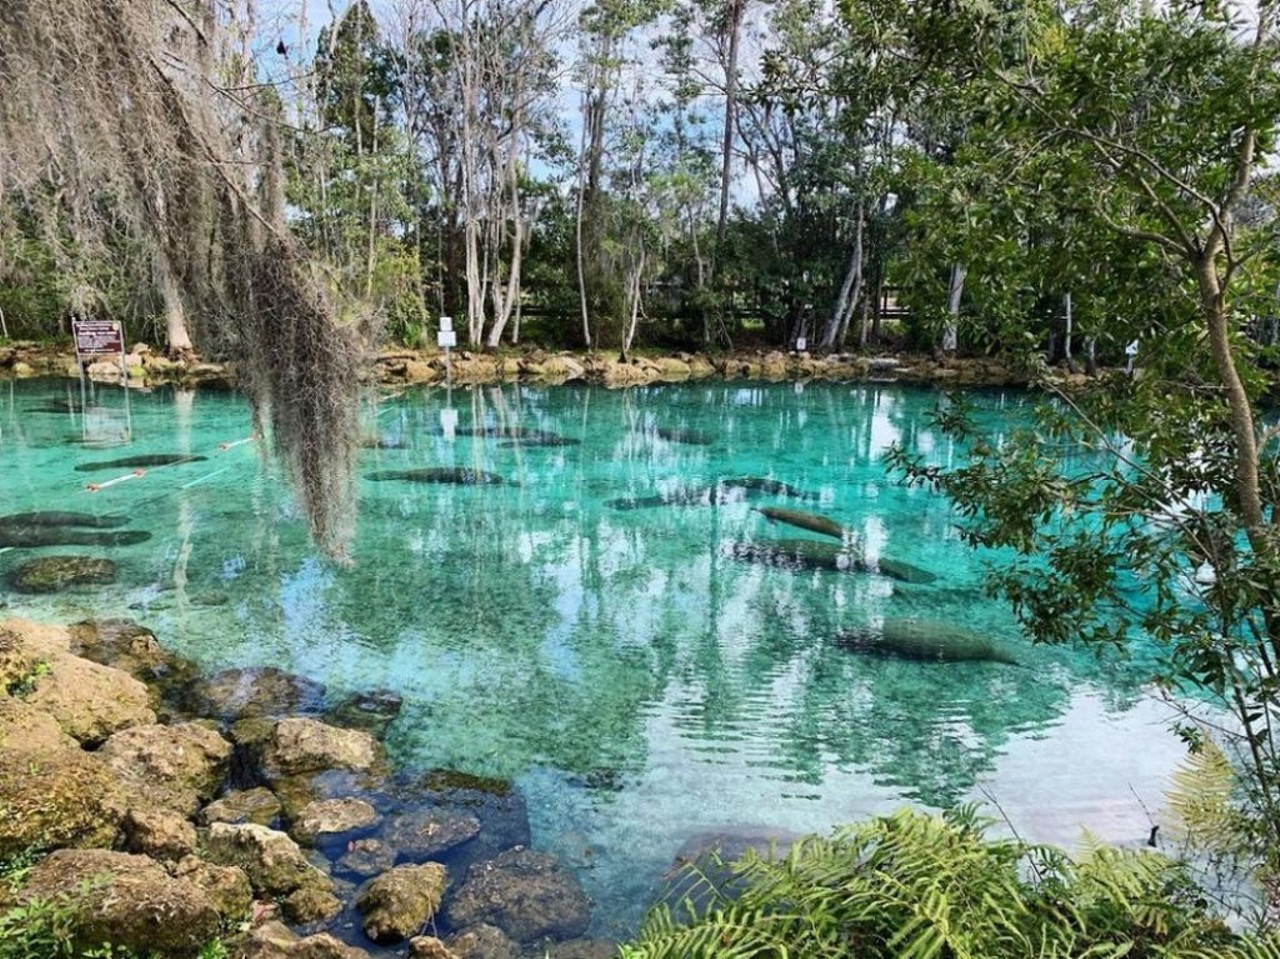 Three Sisters Springs
123 N.W. Highway 19, Crystal River
Three Sisters is an oasis off the beaten path. Guests have to kayak or boat to the spring, and it is well worth the trek to relax in these beautiful waters.
Photo via Three Sisters Springs/Instagram